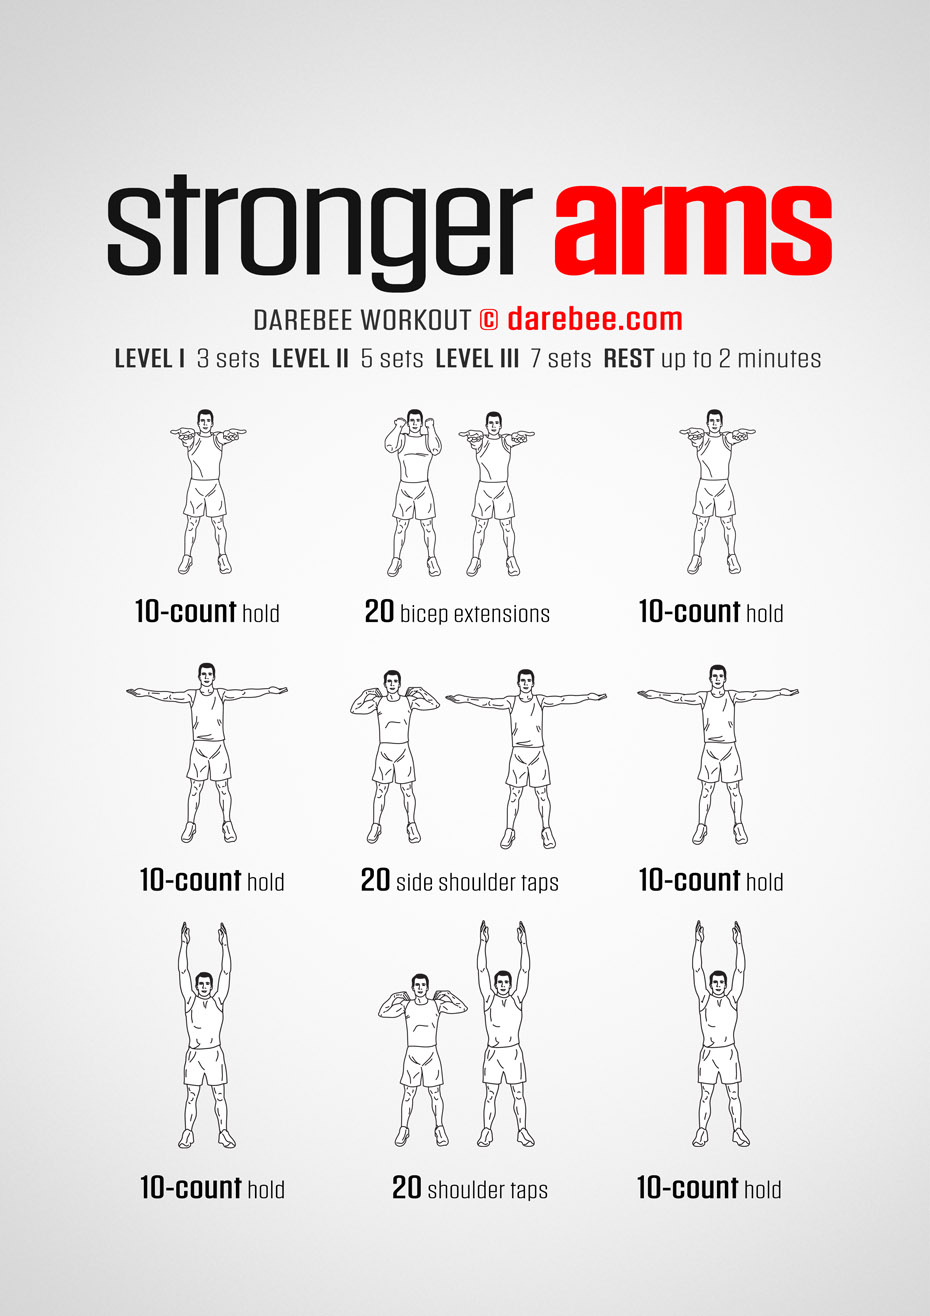 10-Minute Arm Workout: Combo Exercises for Upper-Body Strength